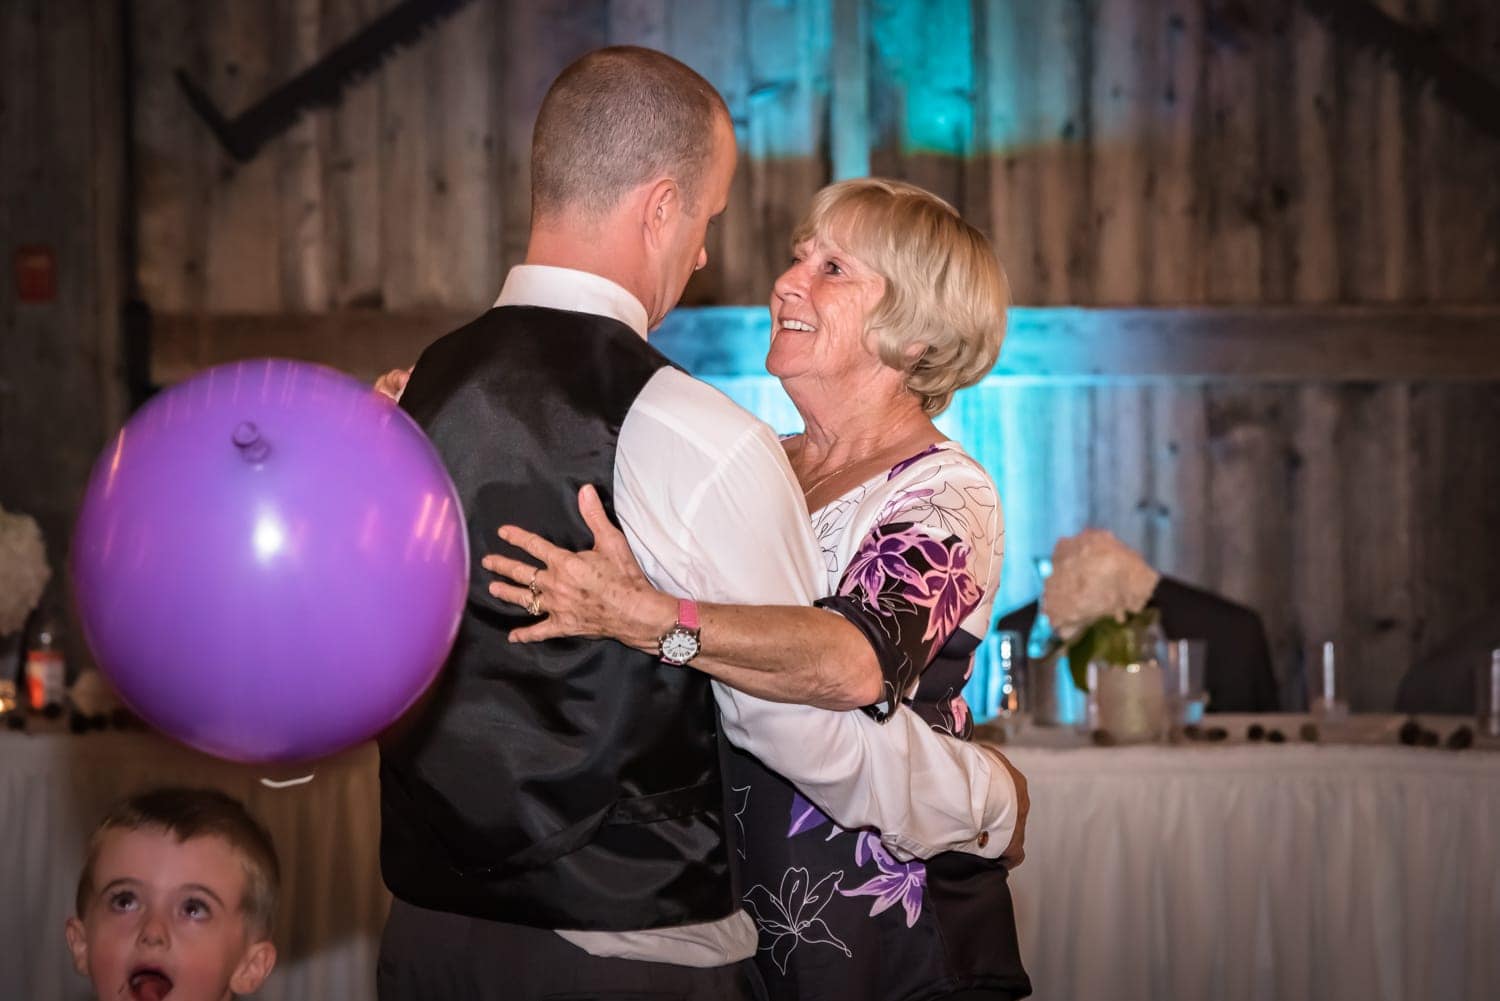 A mother dance's with her son, the groom, during his wedding at the Old Orchard Inn Heritage Barn in Wolfville NS.